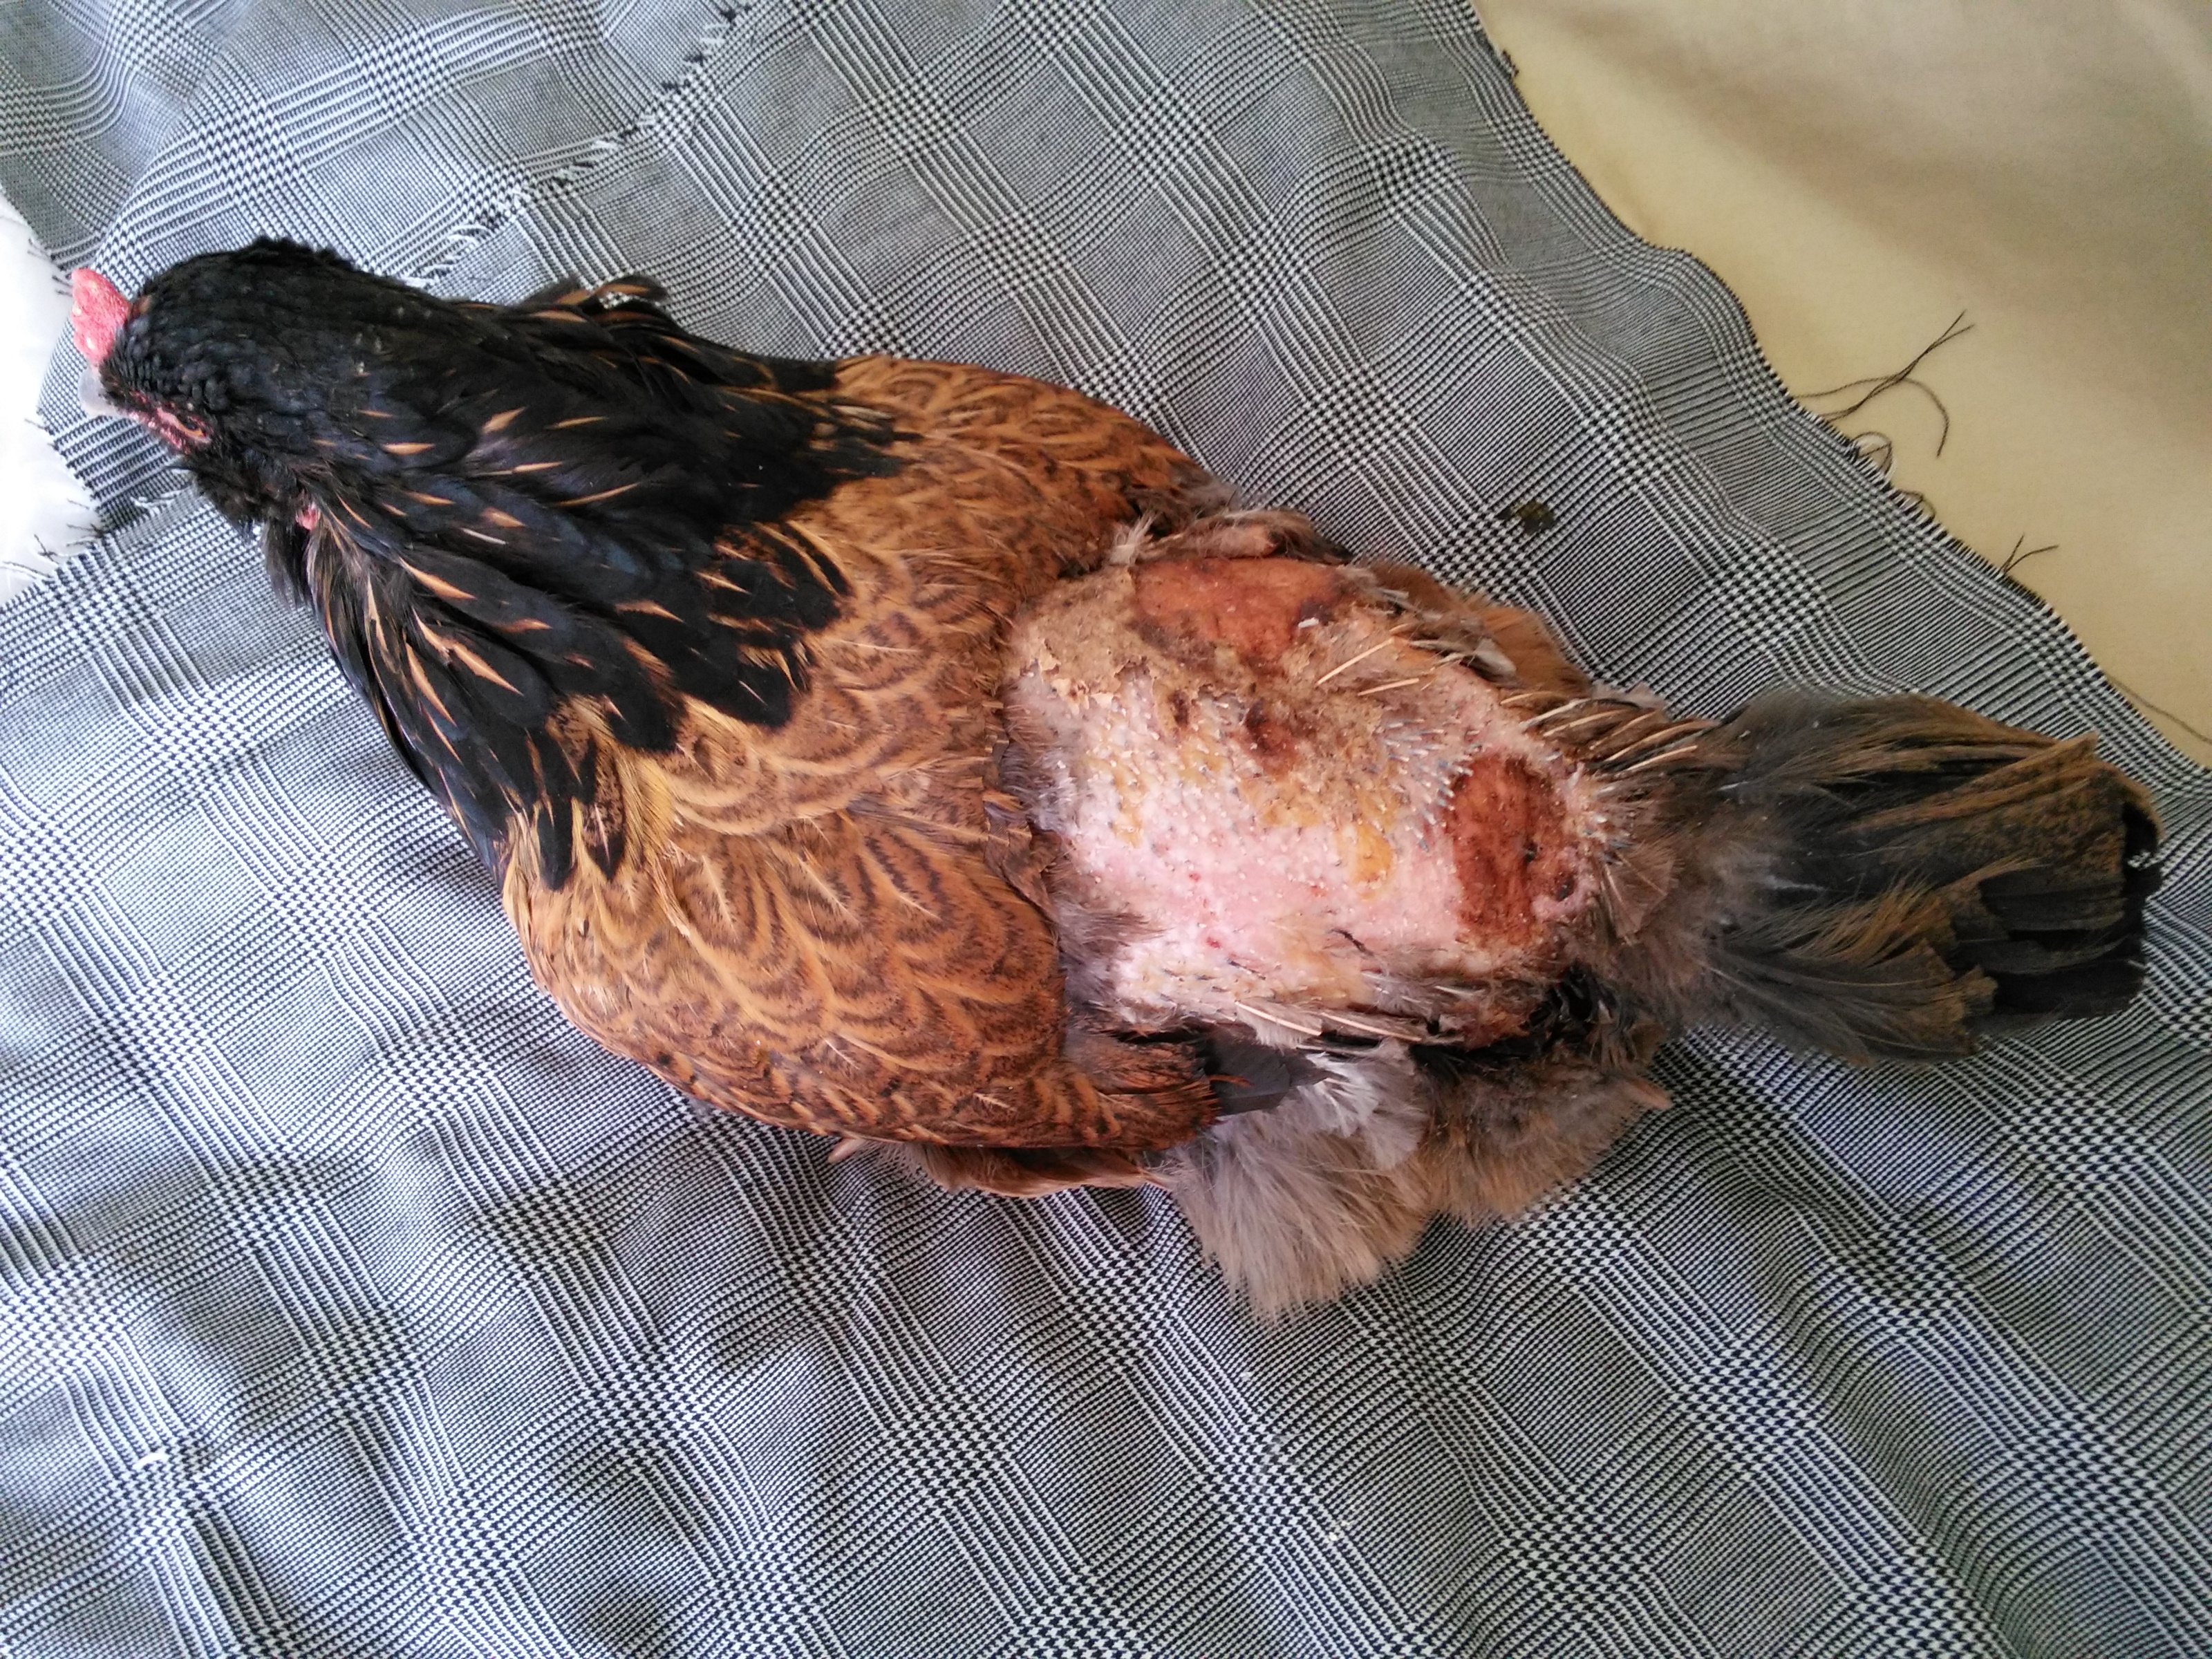 Eleven days into recovery. Tiny stubble of feathers regrowing. Blew my mind that she could regrow feathers where skin had actually been EATEN off, but there's a chicken for you. Amazing.